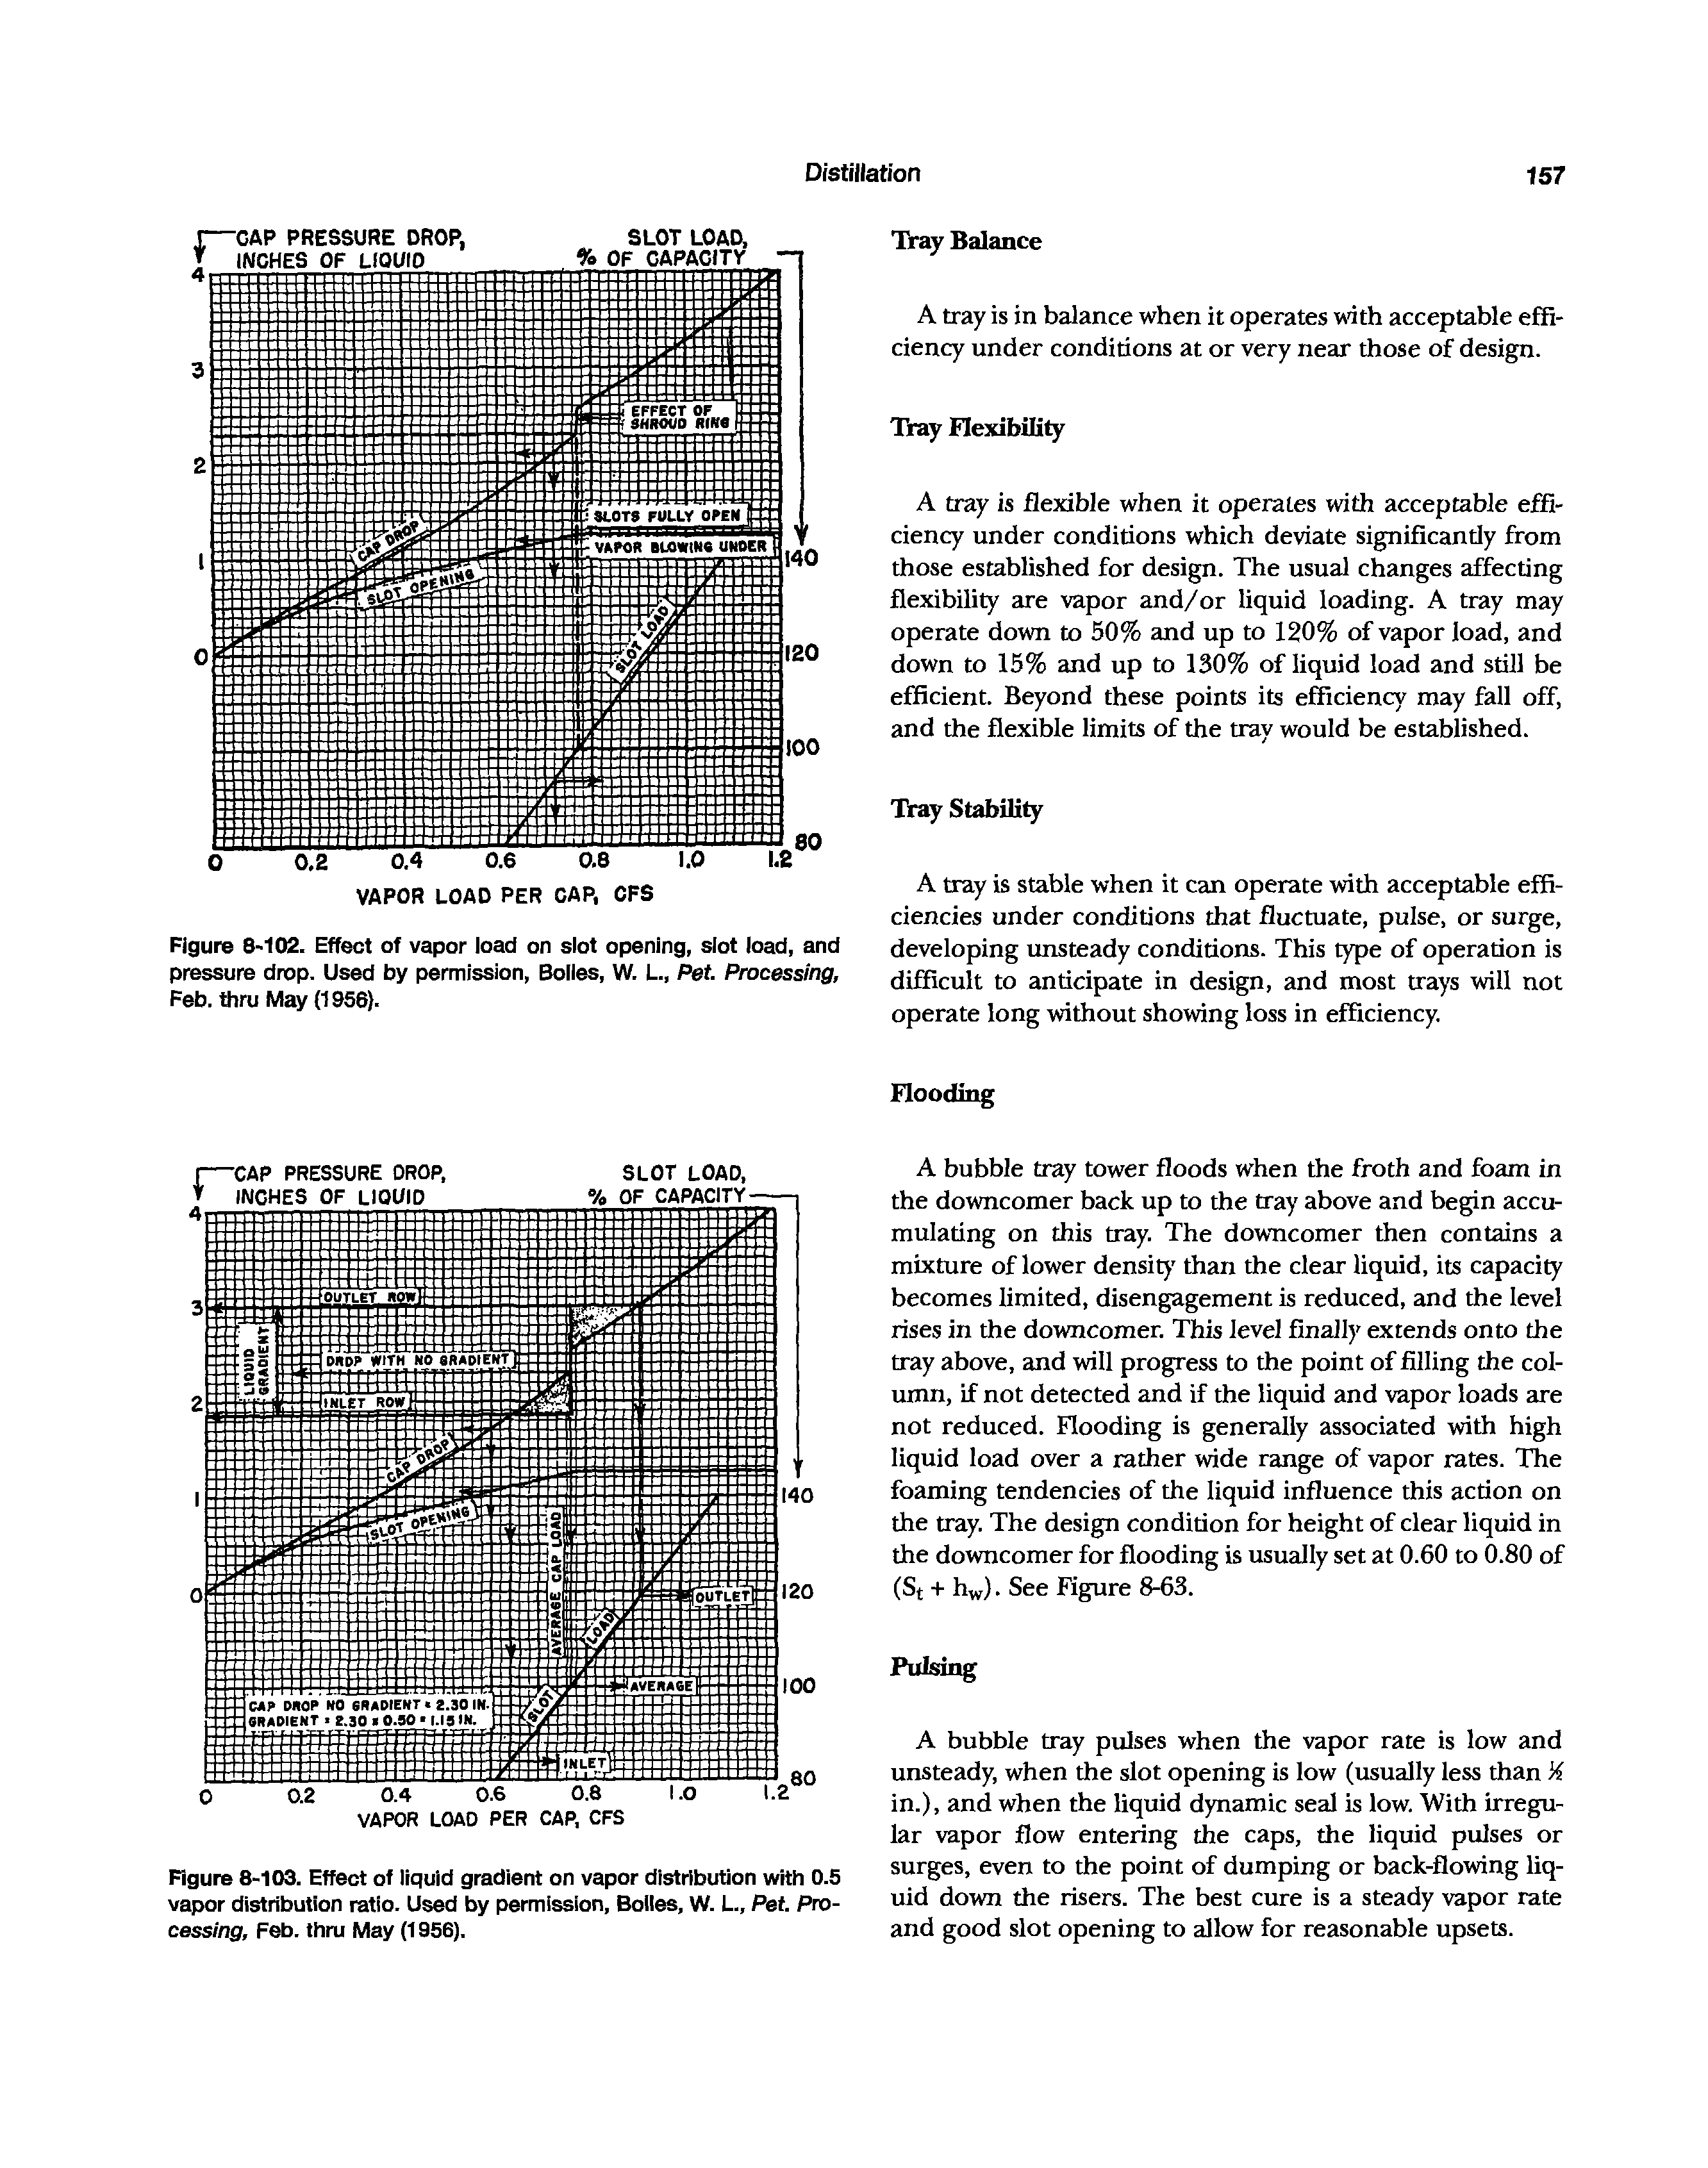 Figure 8-103. Effect of liquid gradient on vapor distribution with 0.5 vapor distribution ratio. Used by permission, Bolies, W. L., Pet. Processing, Feb. thru May (1956).